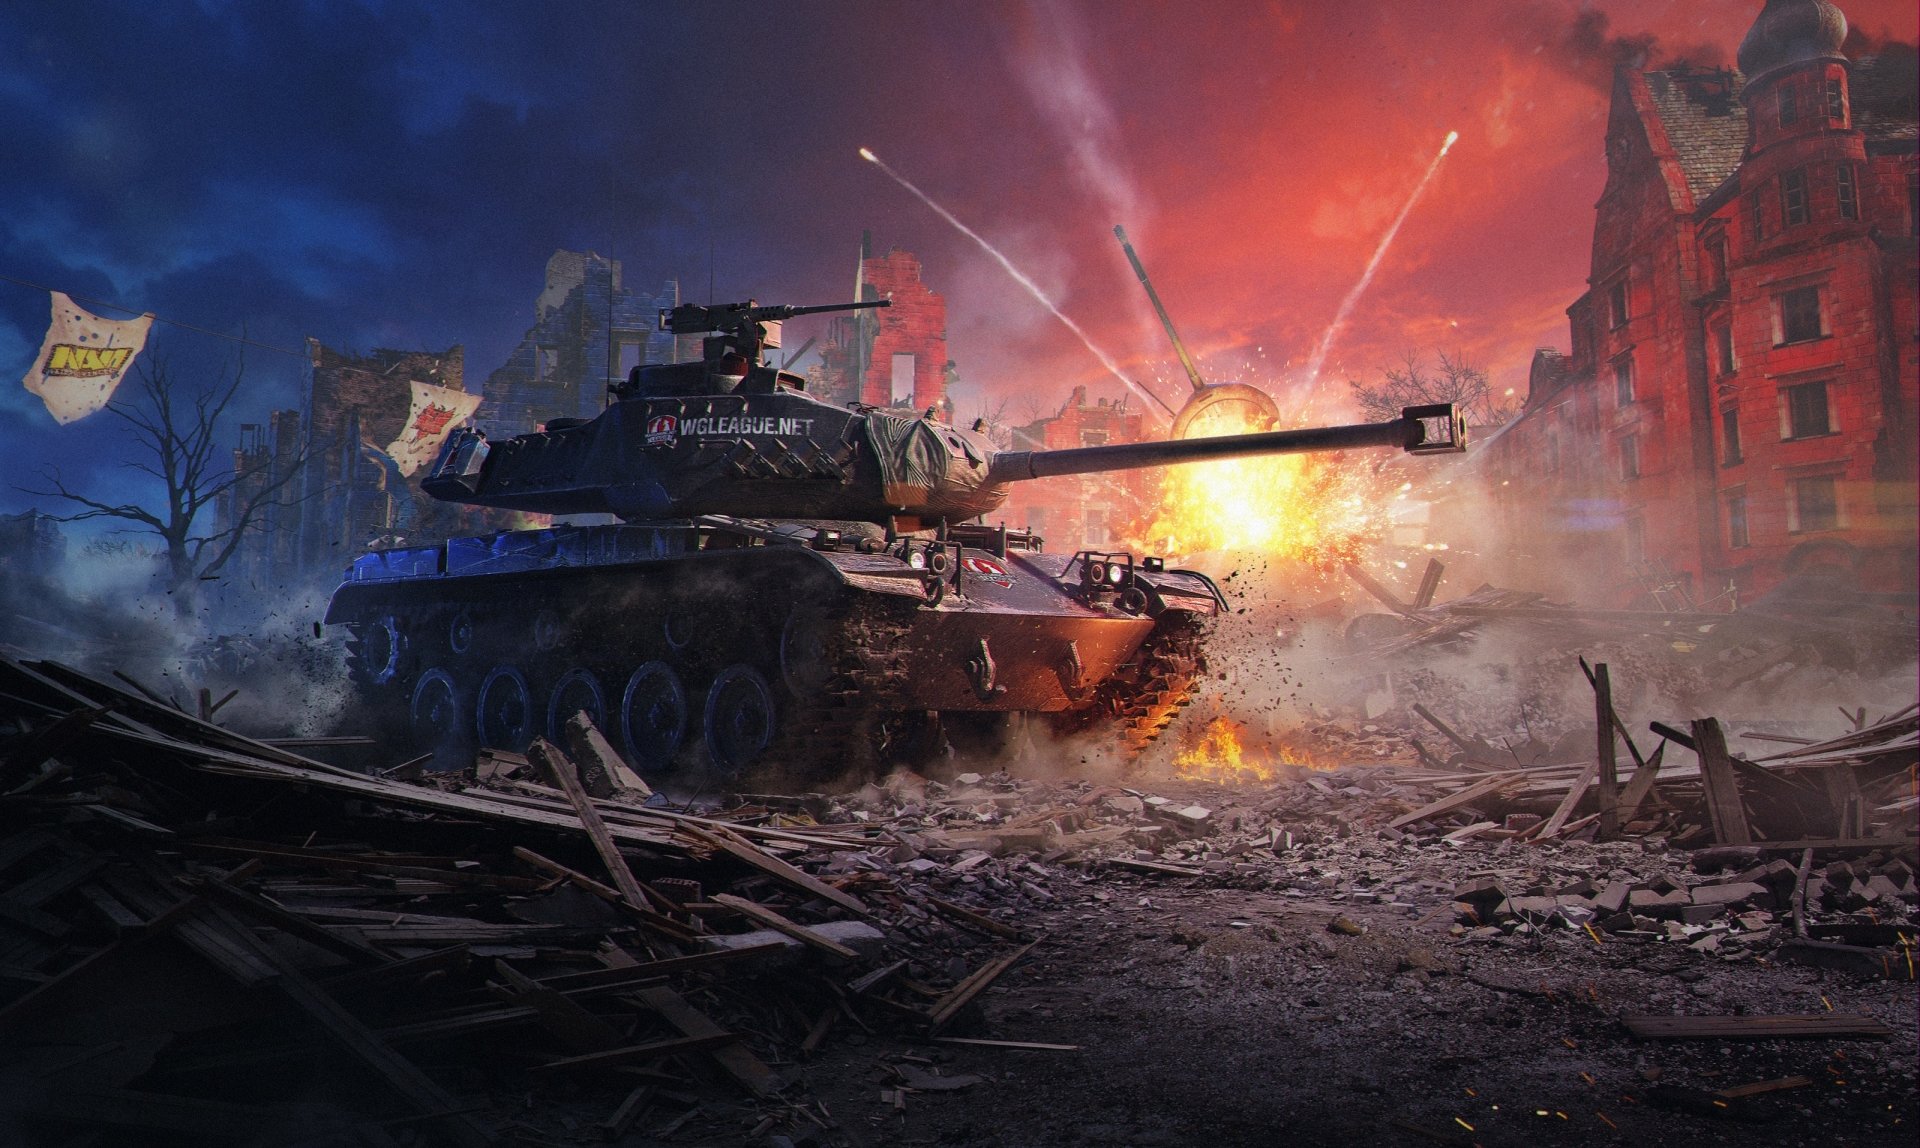 Download Explosion Ruin Tank Video Game World Of Tanks HD Wallpaper